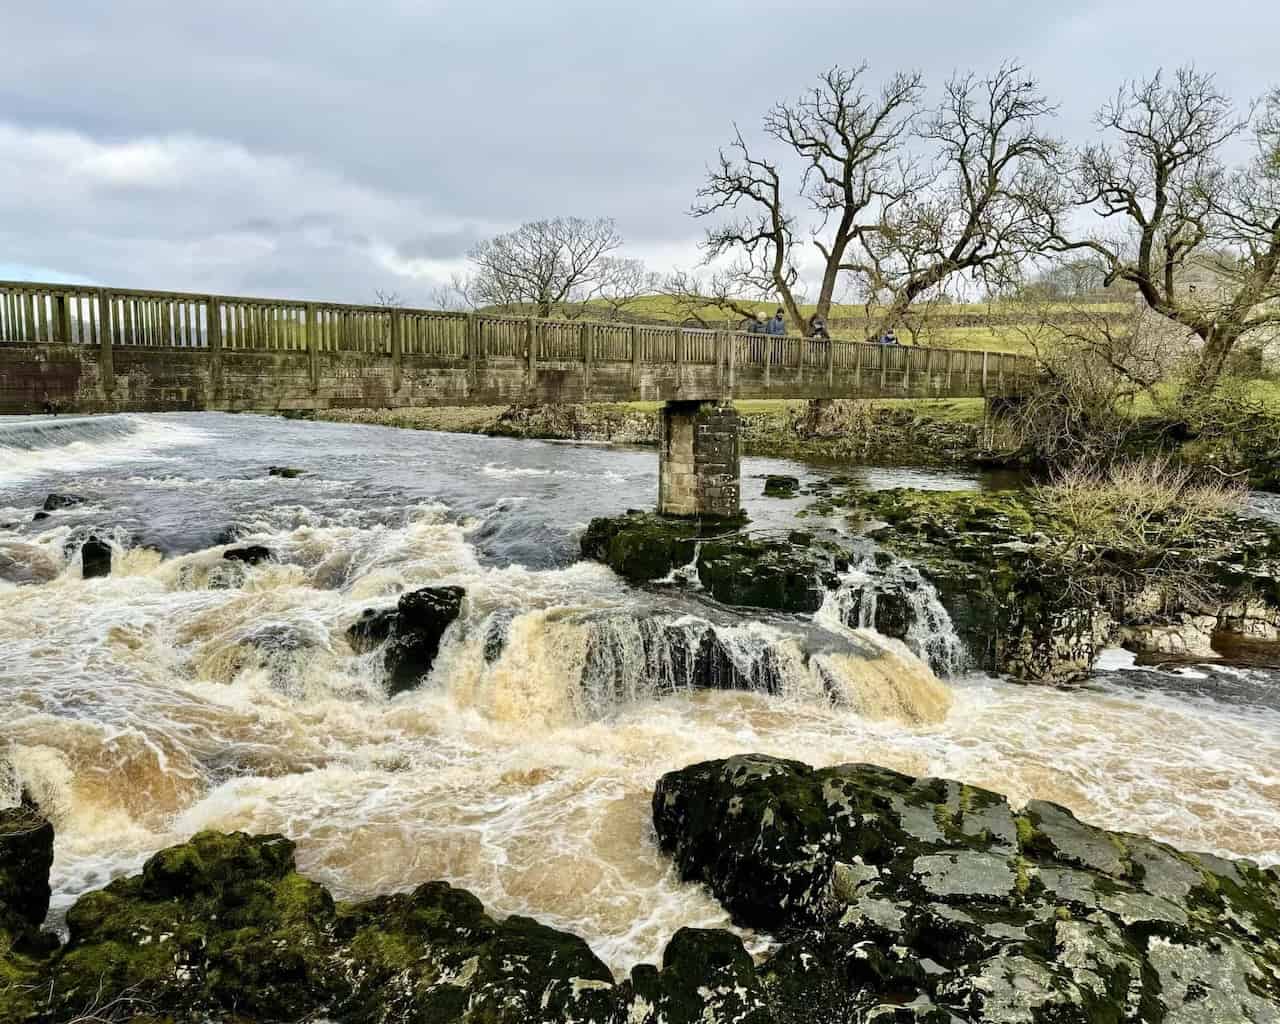 Monday 4 March: Leisurely strolls through the Yorkshire Dales from Grassington. Of all the circular walks in Yorkshire, this one captured our affections profoundly.